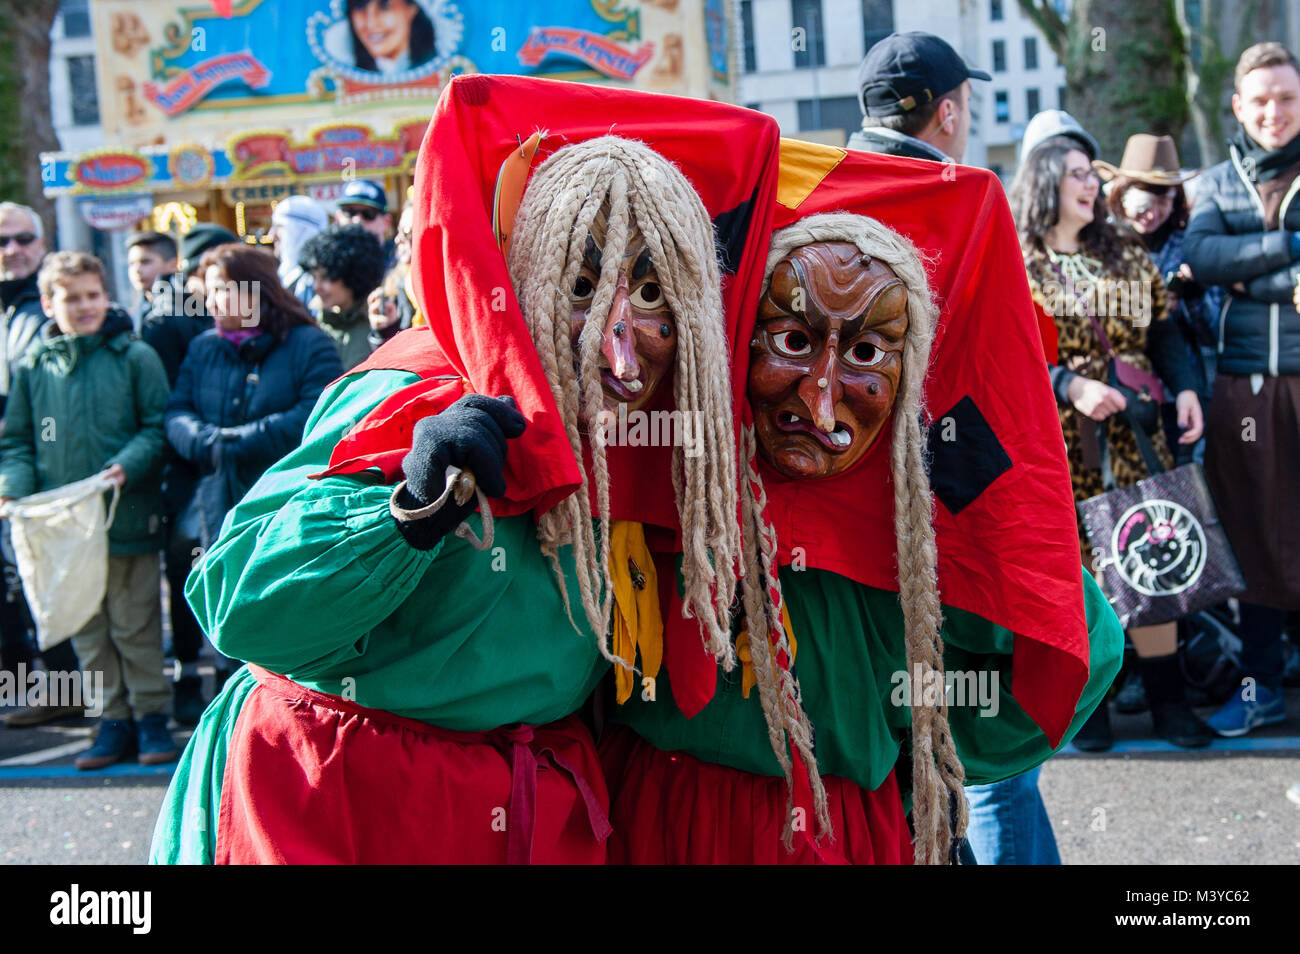 Düsseldorf, Germany, 12 February 2018. The Carnival events features more than 300 Carnival shows, balls, anniversaries, receptions and costume parties. The motto this season is ‘Jeck erst recht’ (Carnival more than ever). The Rose Monday Parade is the culmination of the celebration and gathers 5,000 participants that join the procession through the city. It featuring more than 30 music ensembles and elaborately built and decorated floats addressing cultural and political issues with a satirical, hilarious and controversial mood, such as the famous politically themed floats of Jacques Tilly. Stock Photo